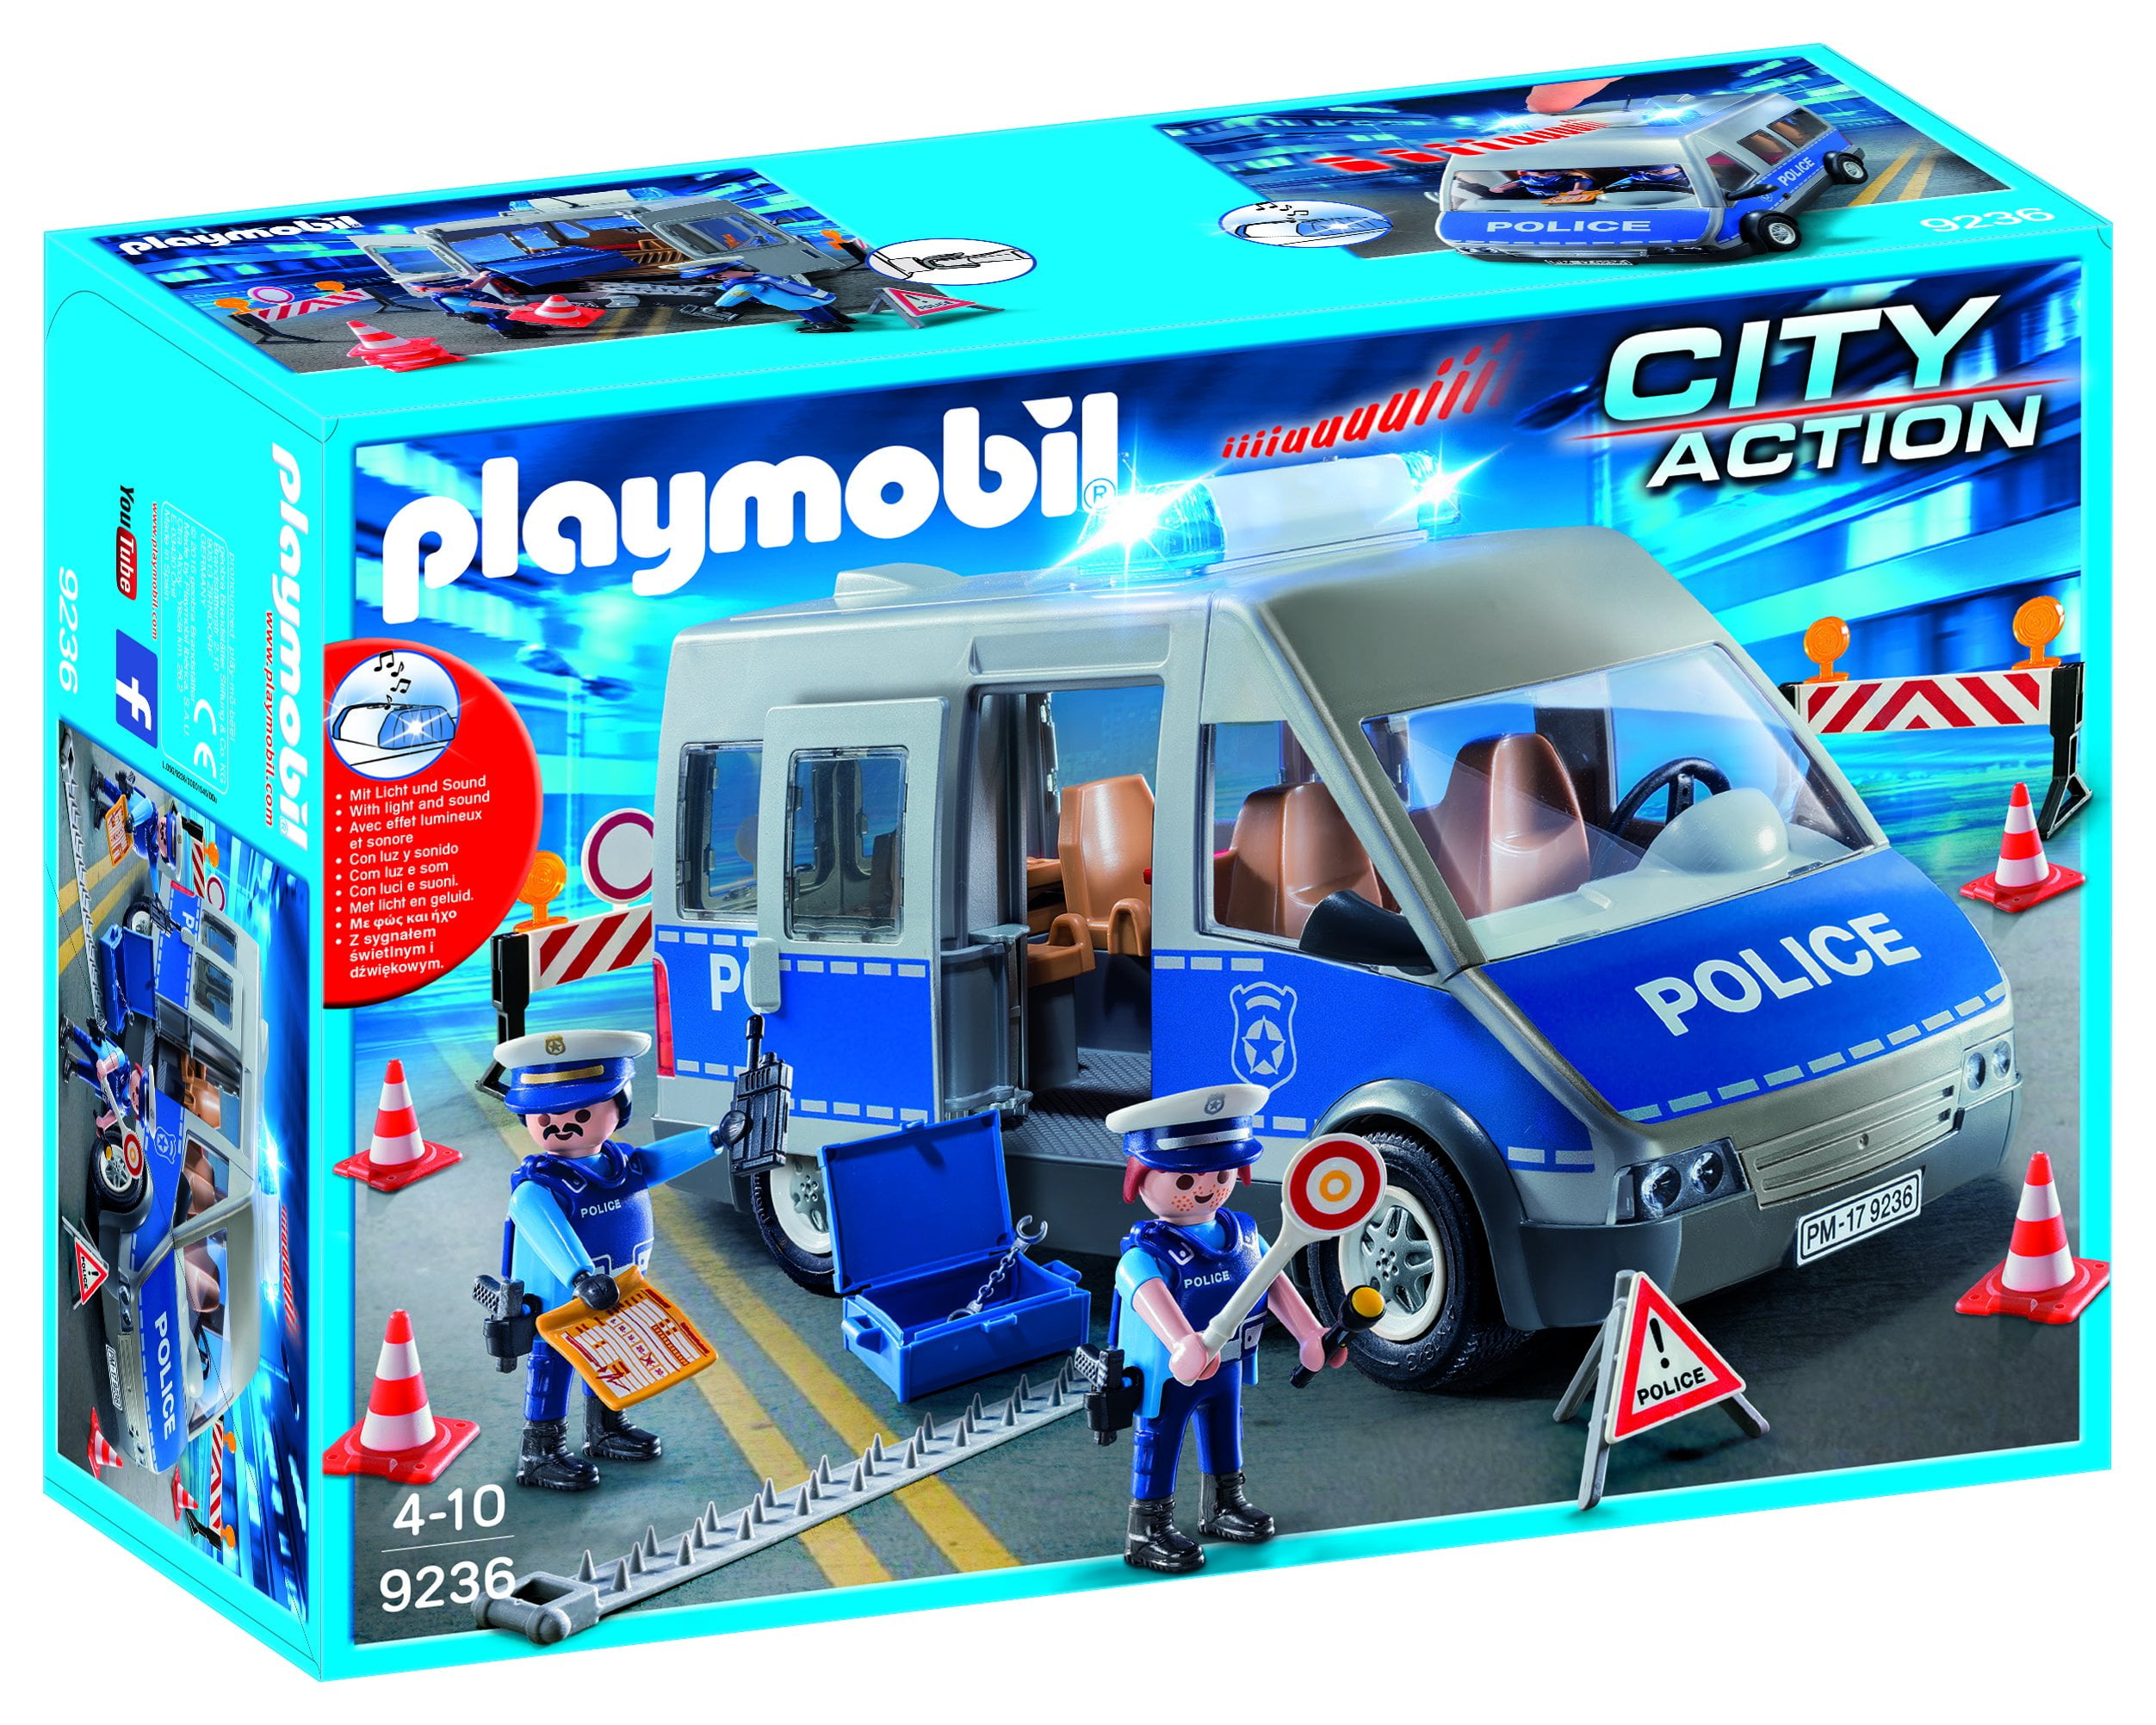 Imaginative Play Set by Playmobil (9236 